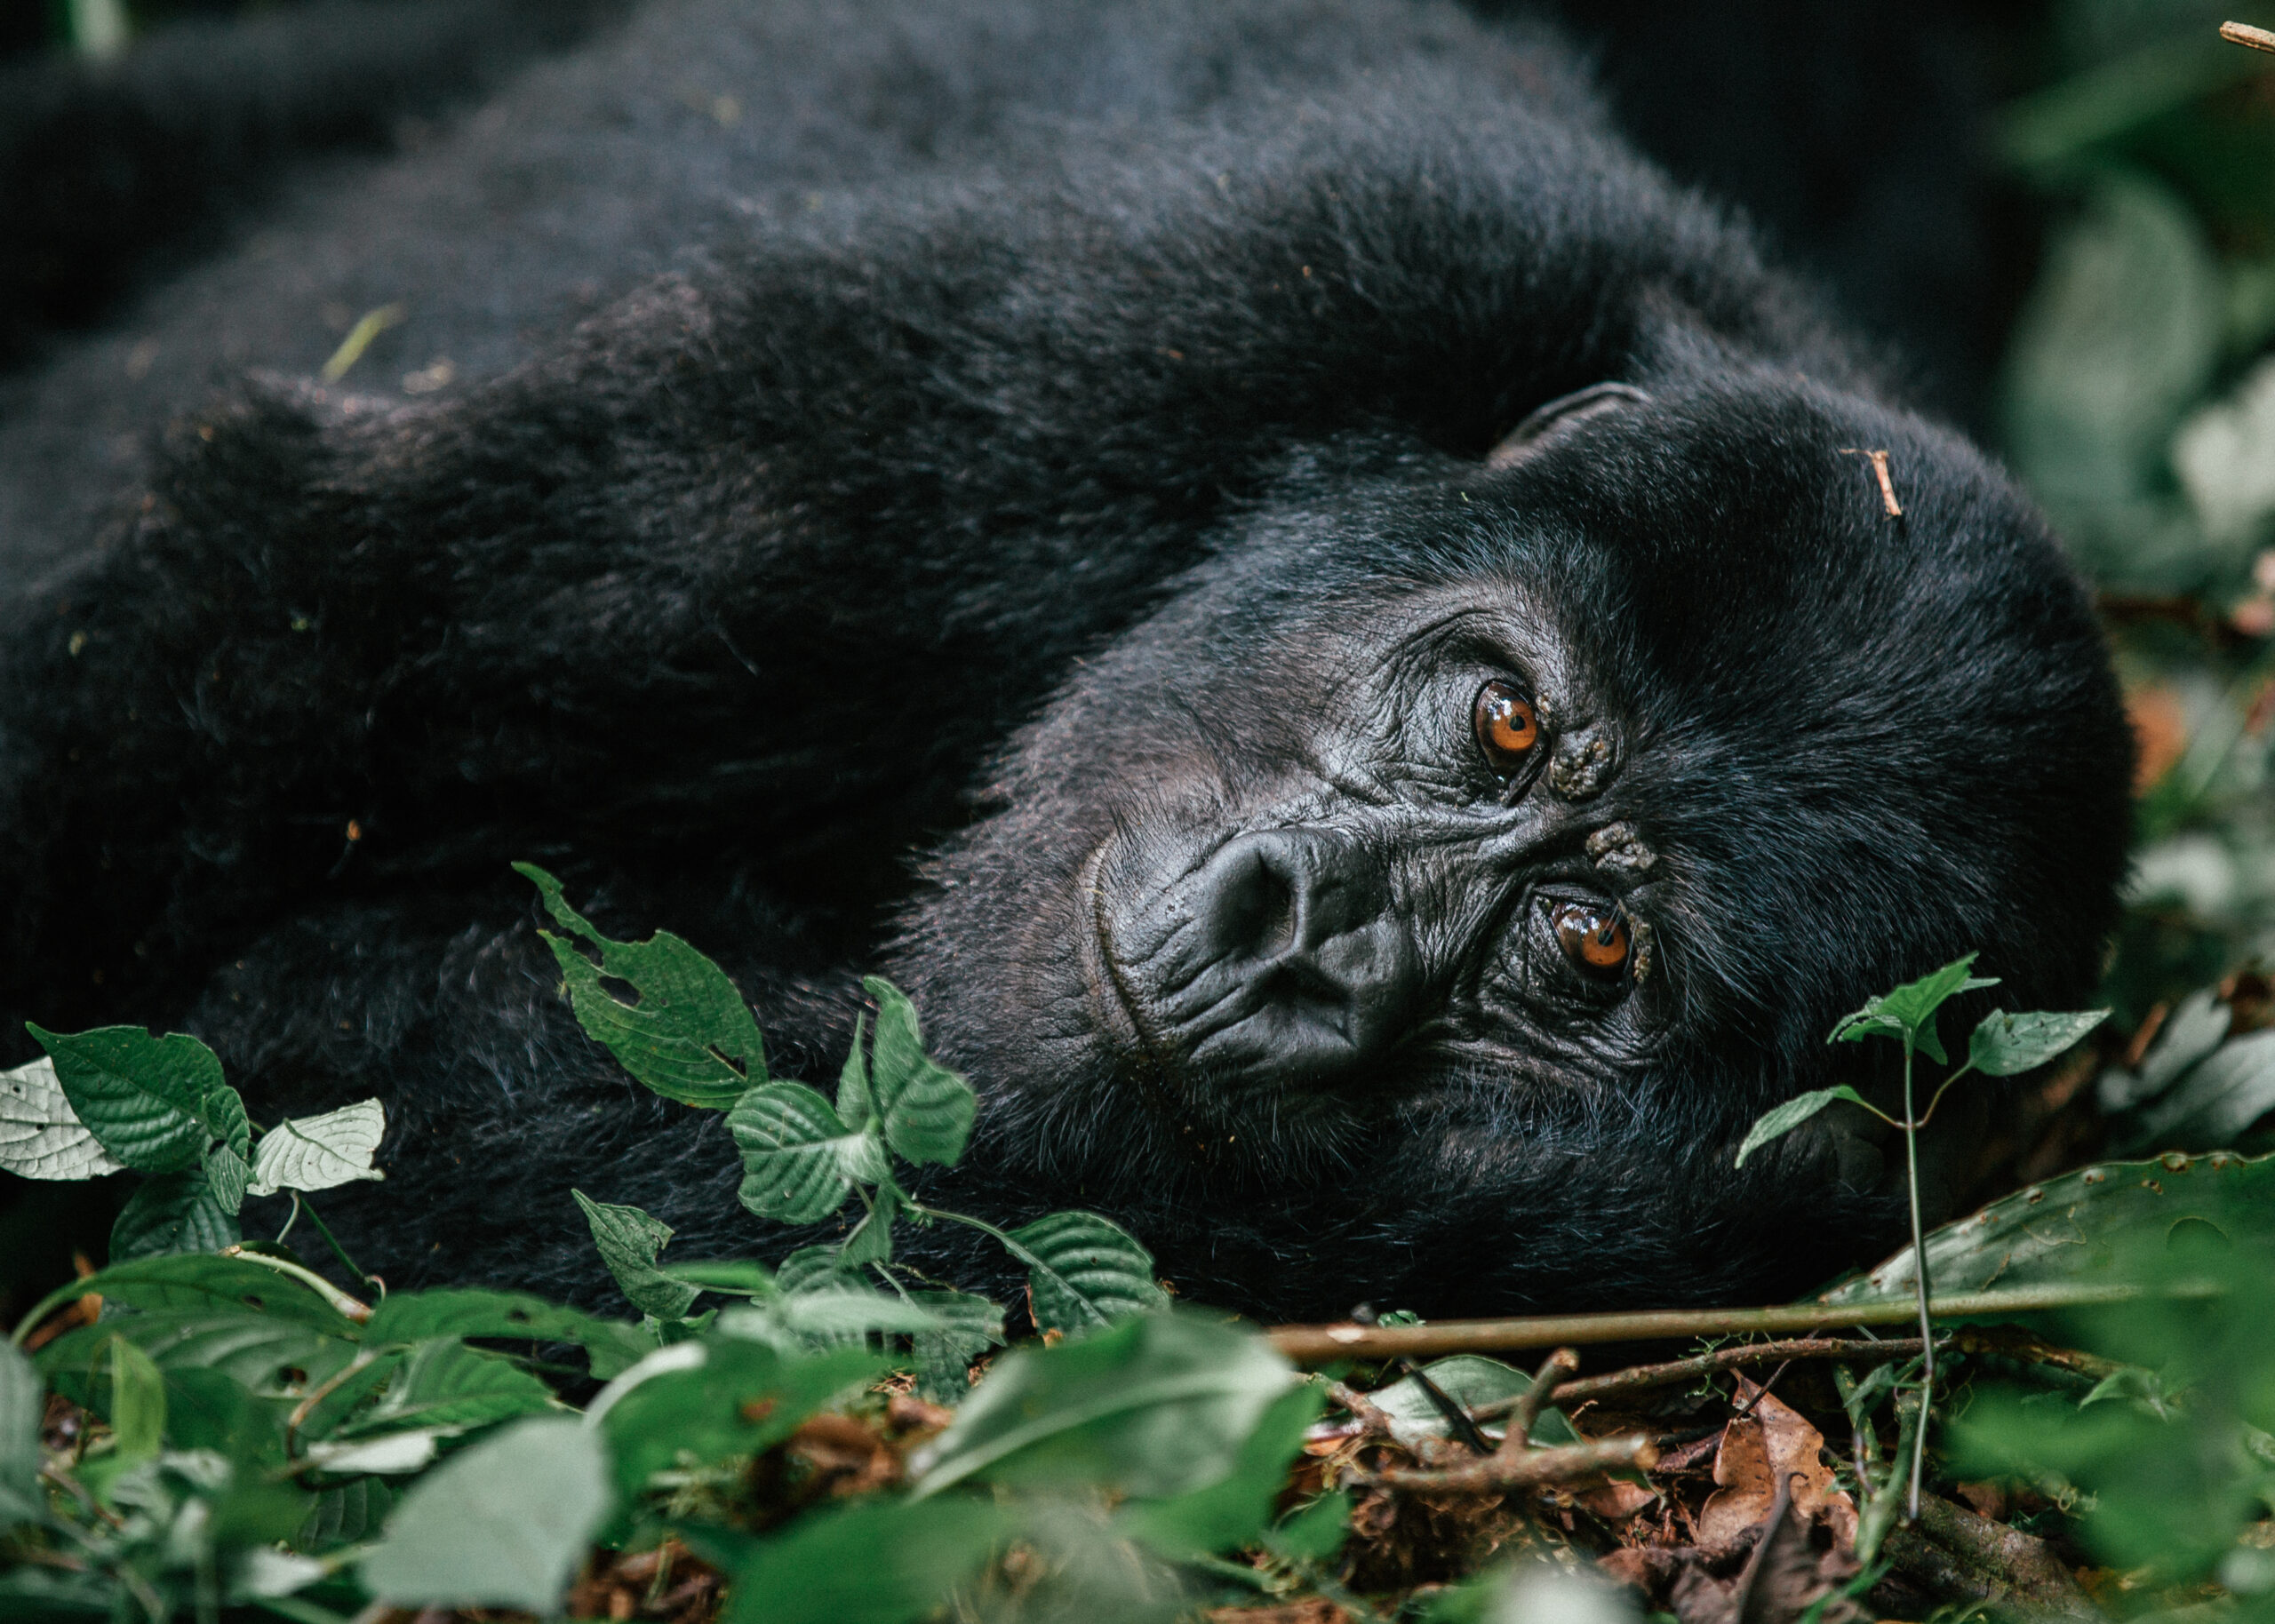 A guide to tracking the mountain gorillas in Uganda's Bwindi Impenetrable Rainforest including permits, lodges, the hike, guides and more.